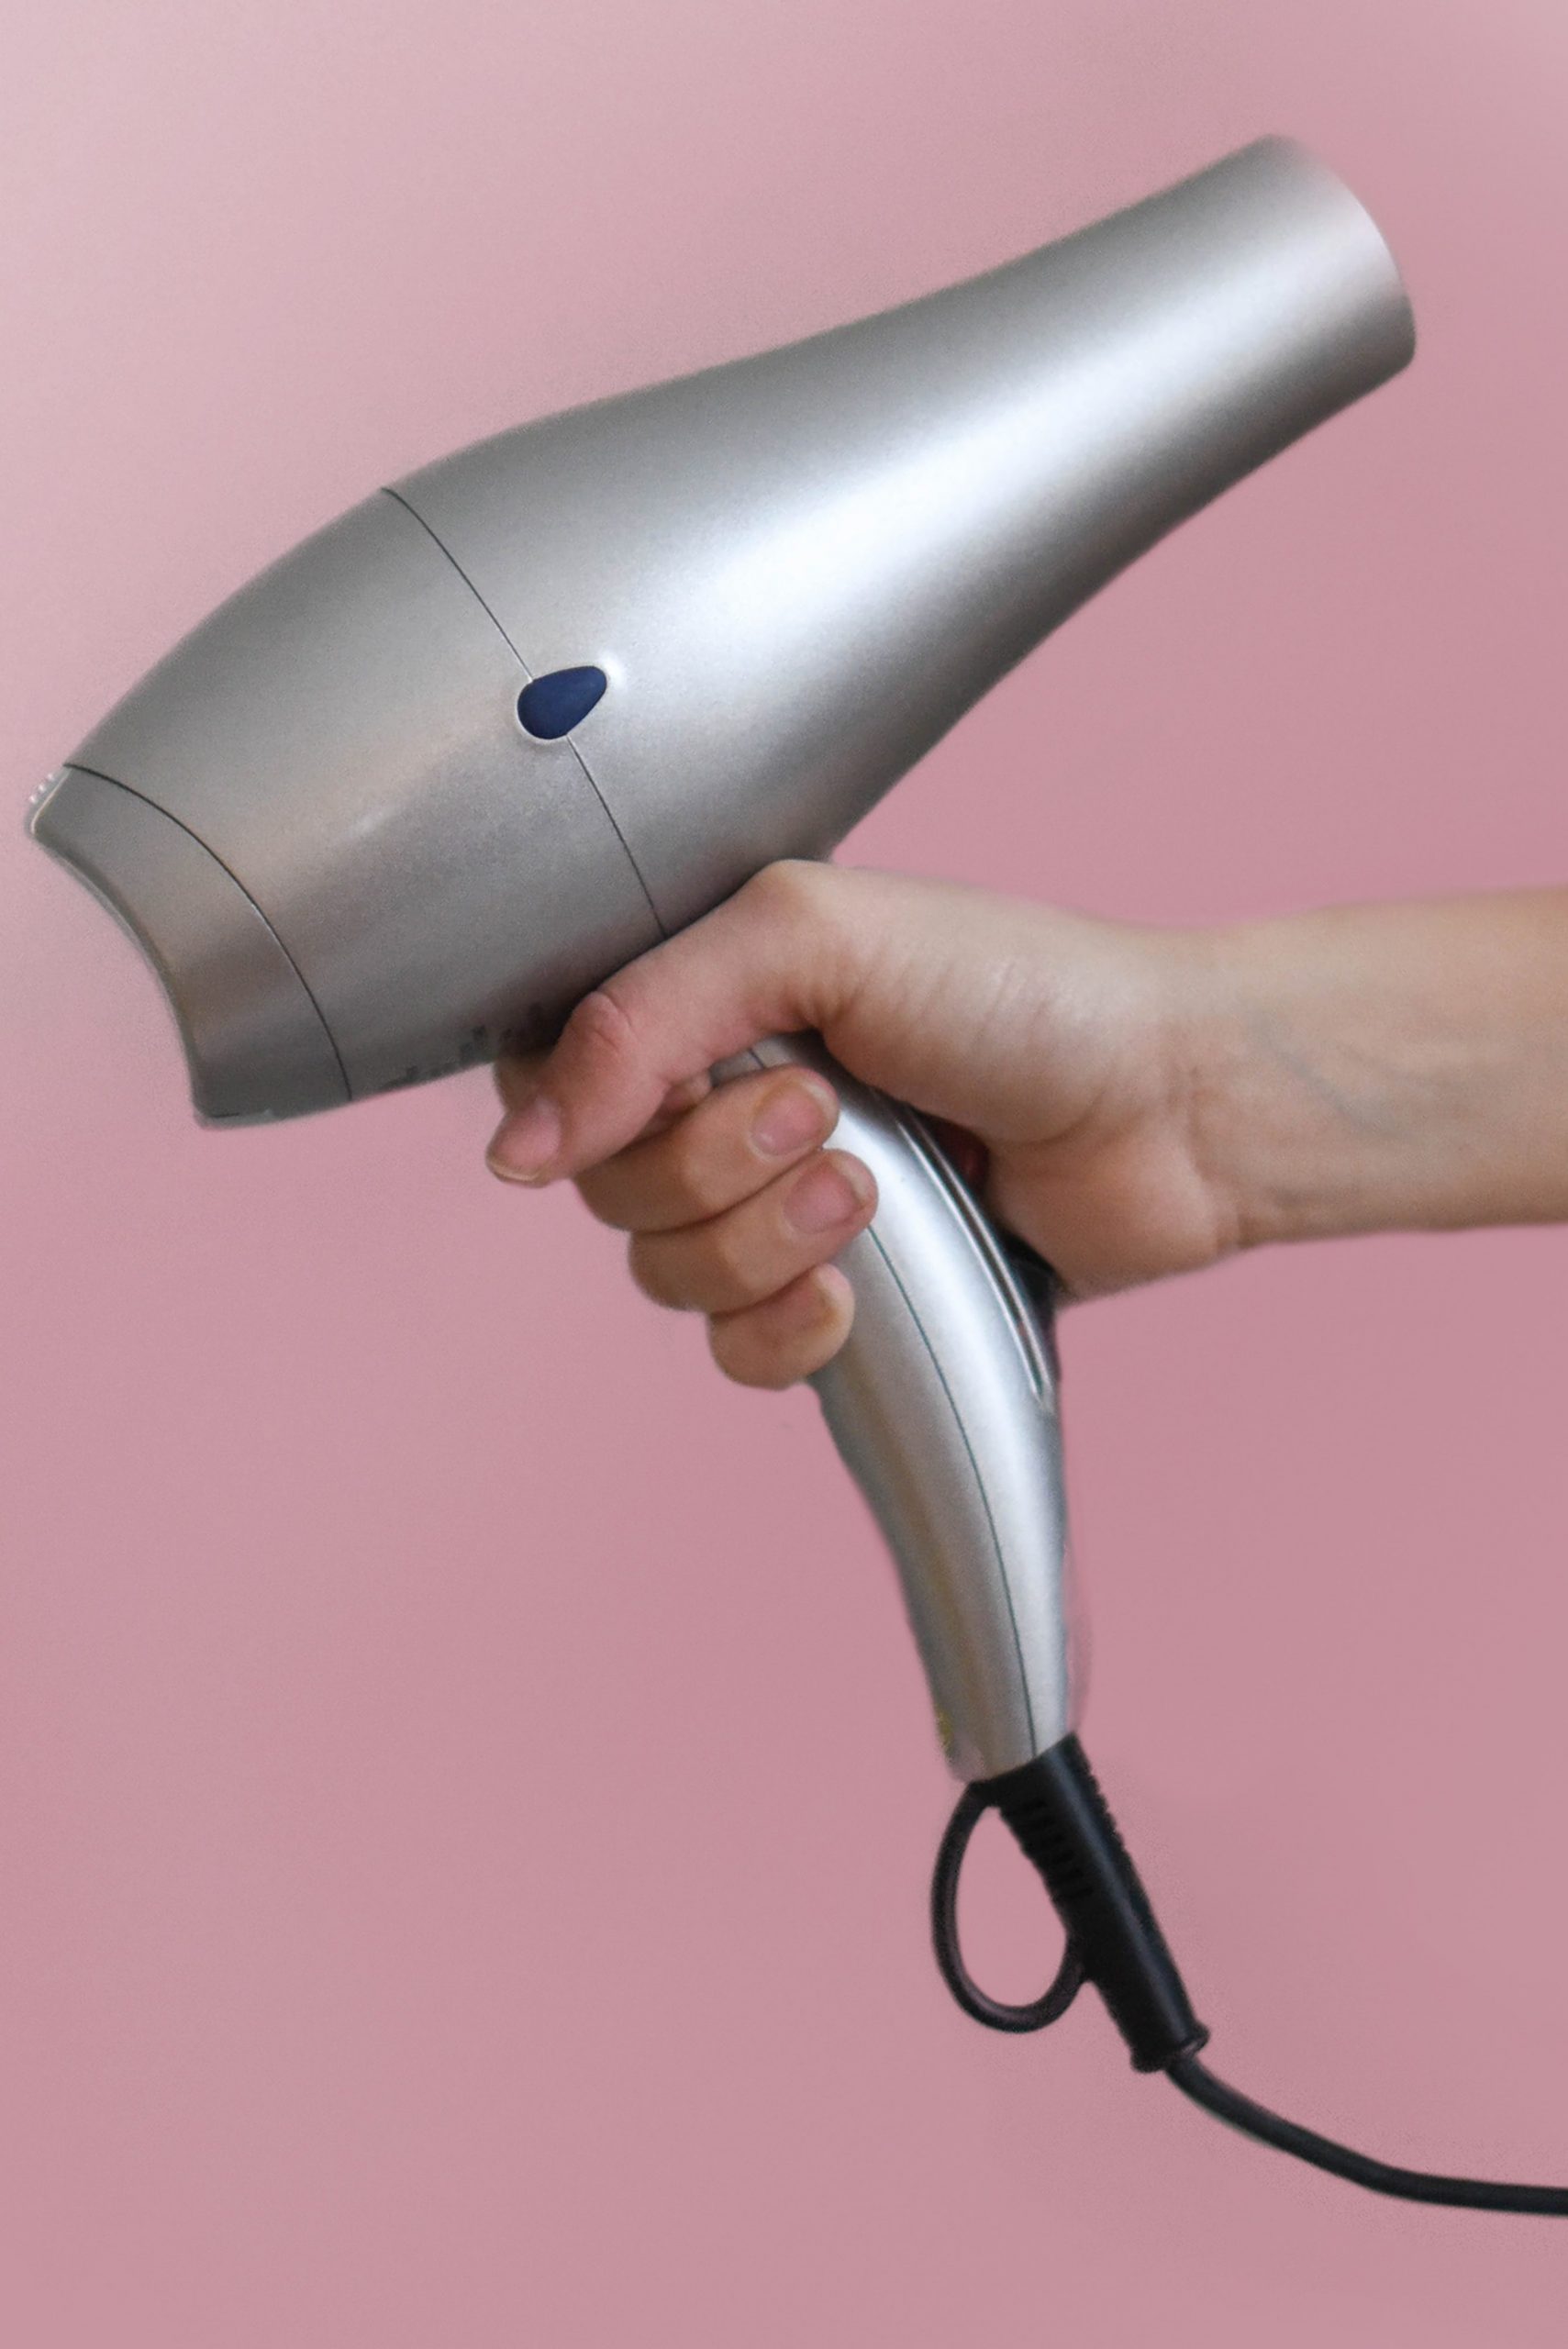 Person holding hair dryer